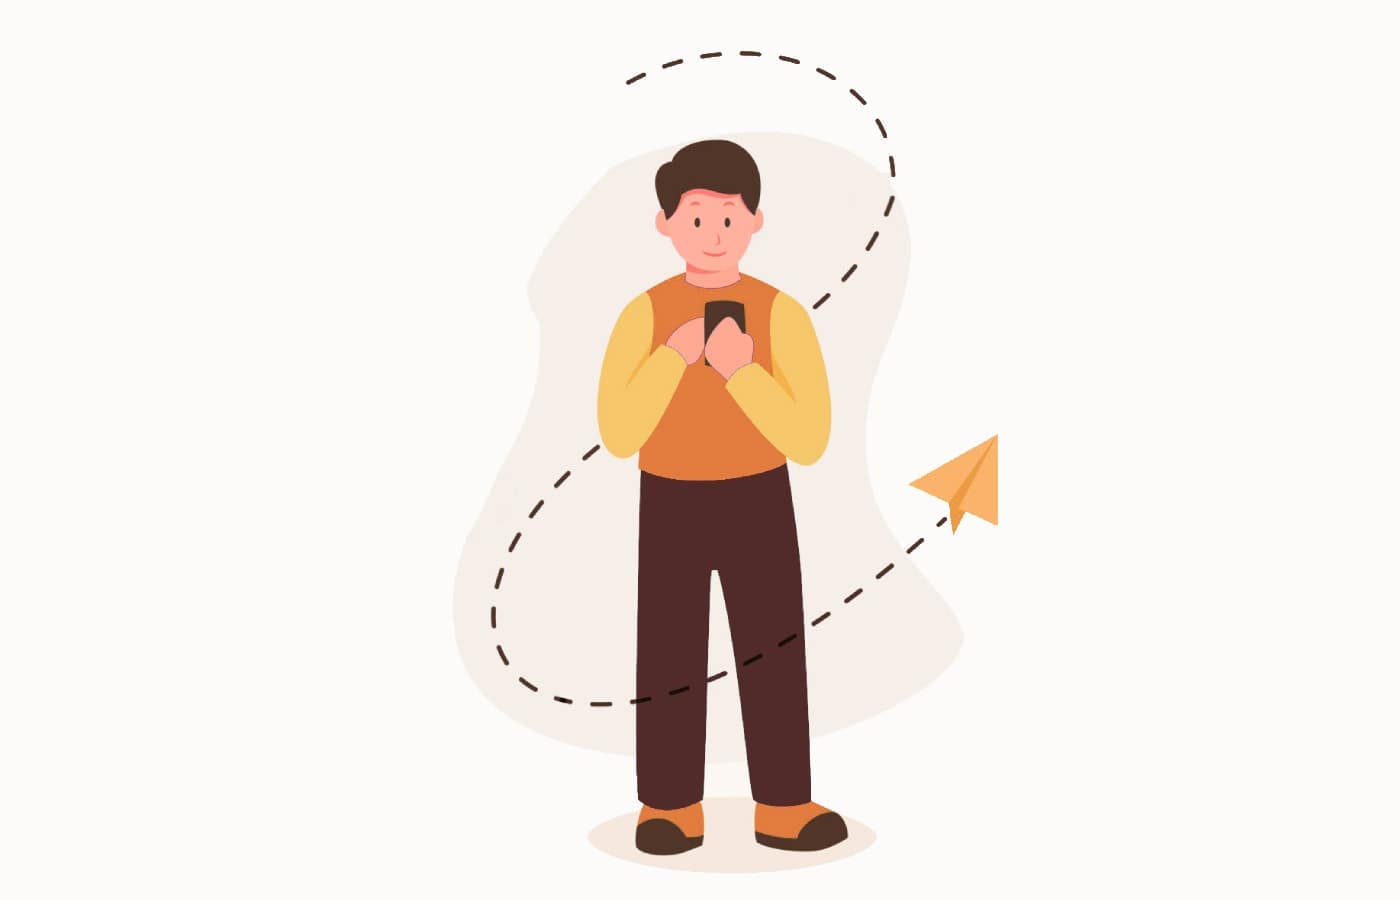 An illustration of a guy using his phone with a paper airplane in the background